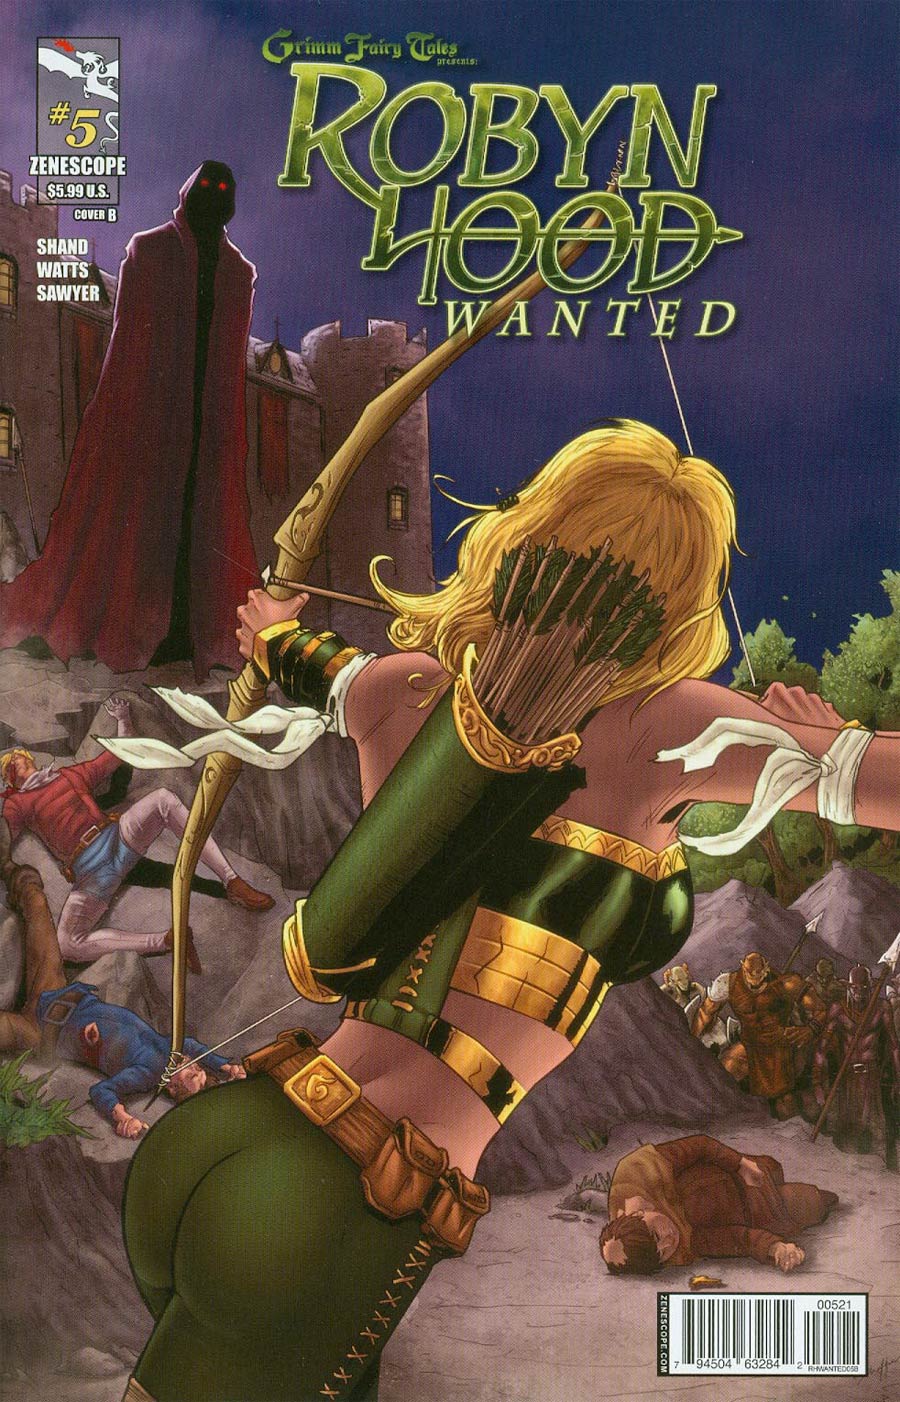 Grimm Fairy Tales Presents Robyn Hood Wanted #5 Cover B Larry Watts